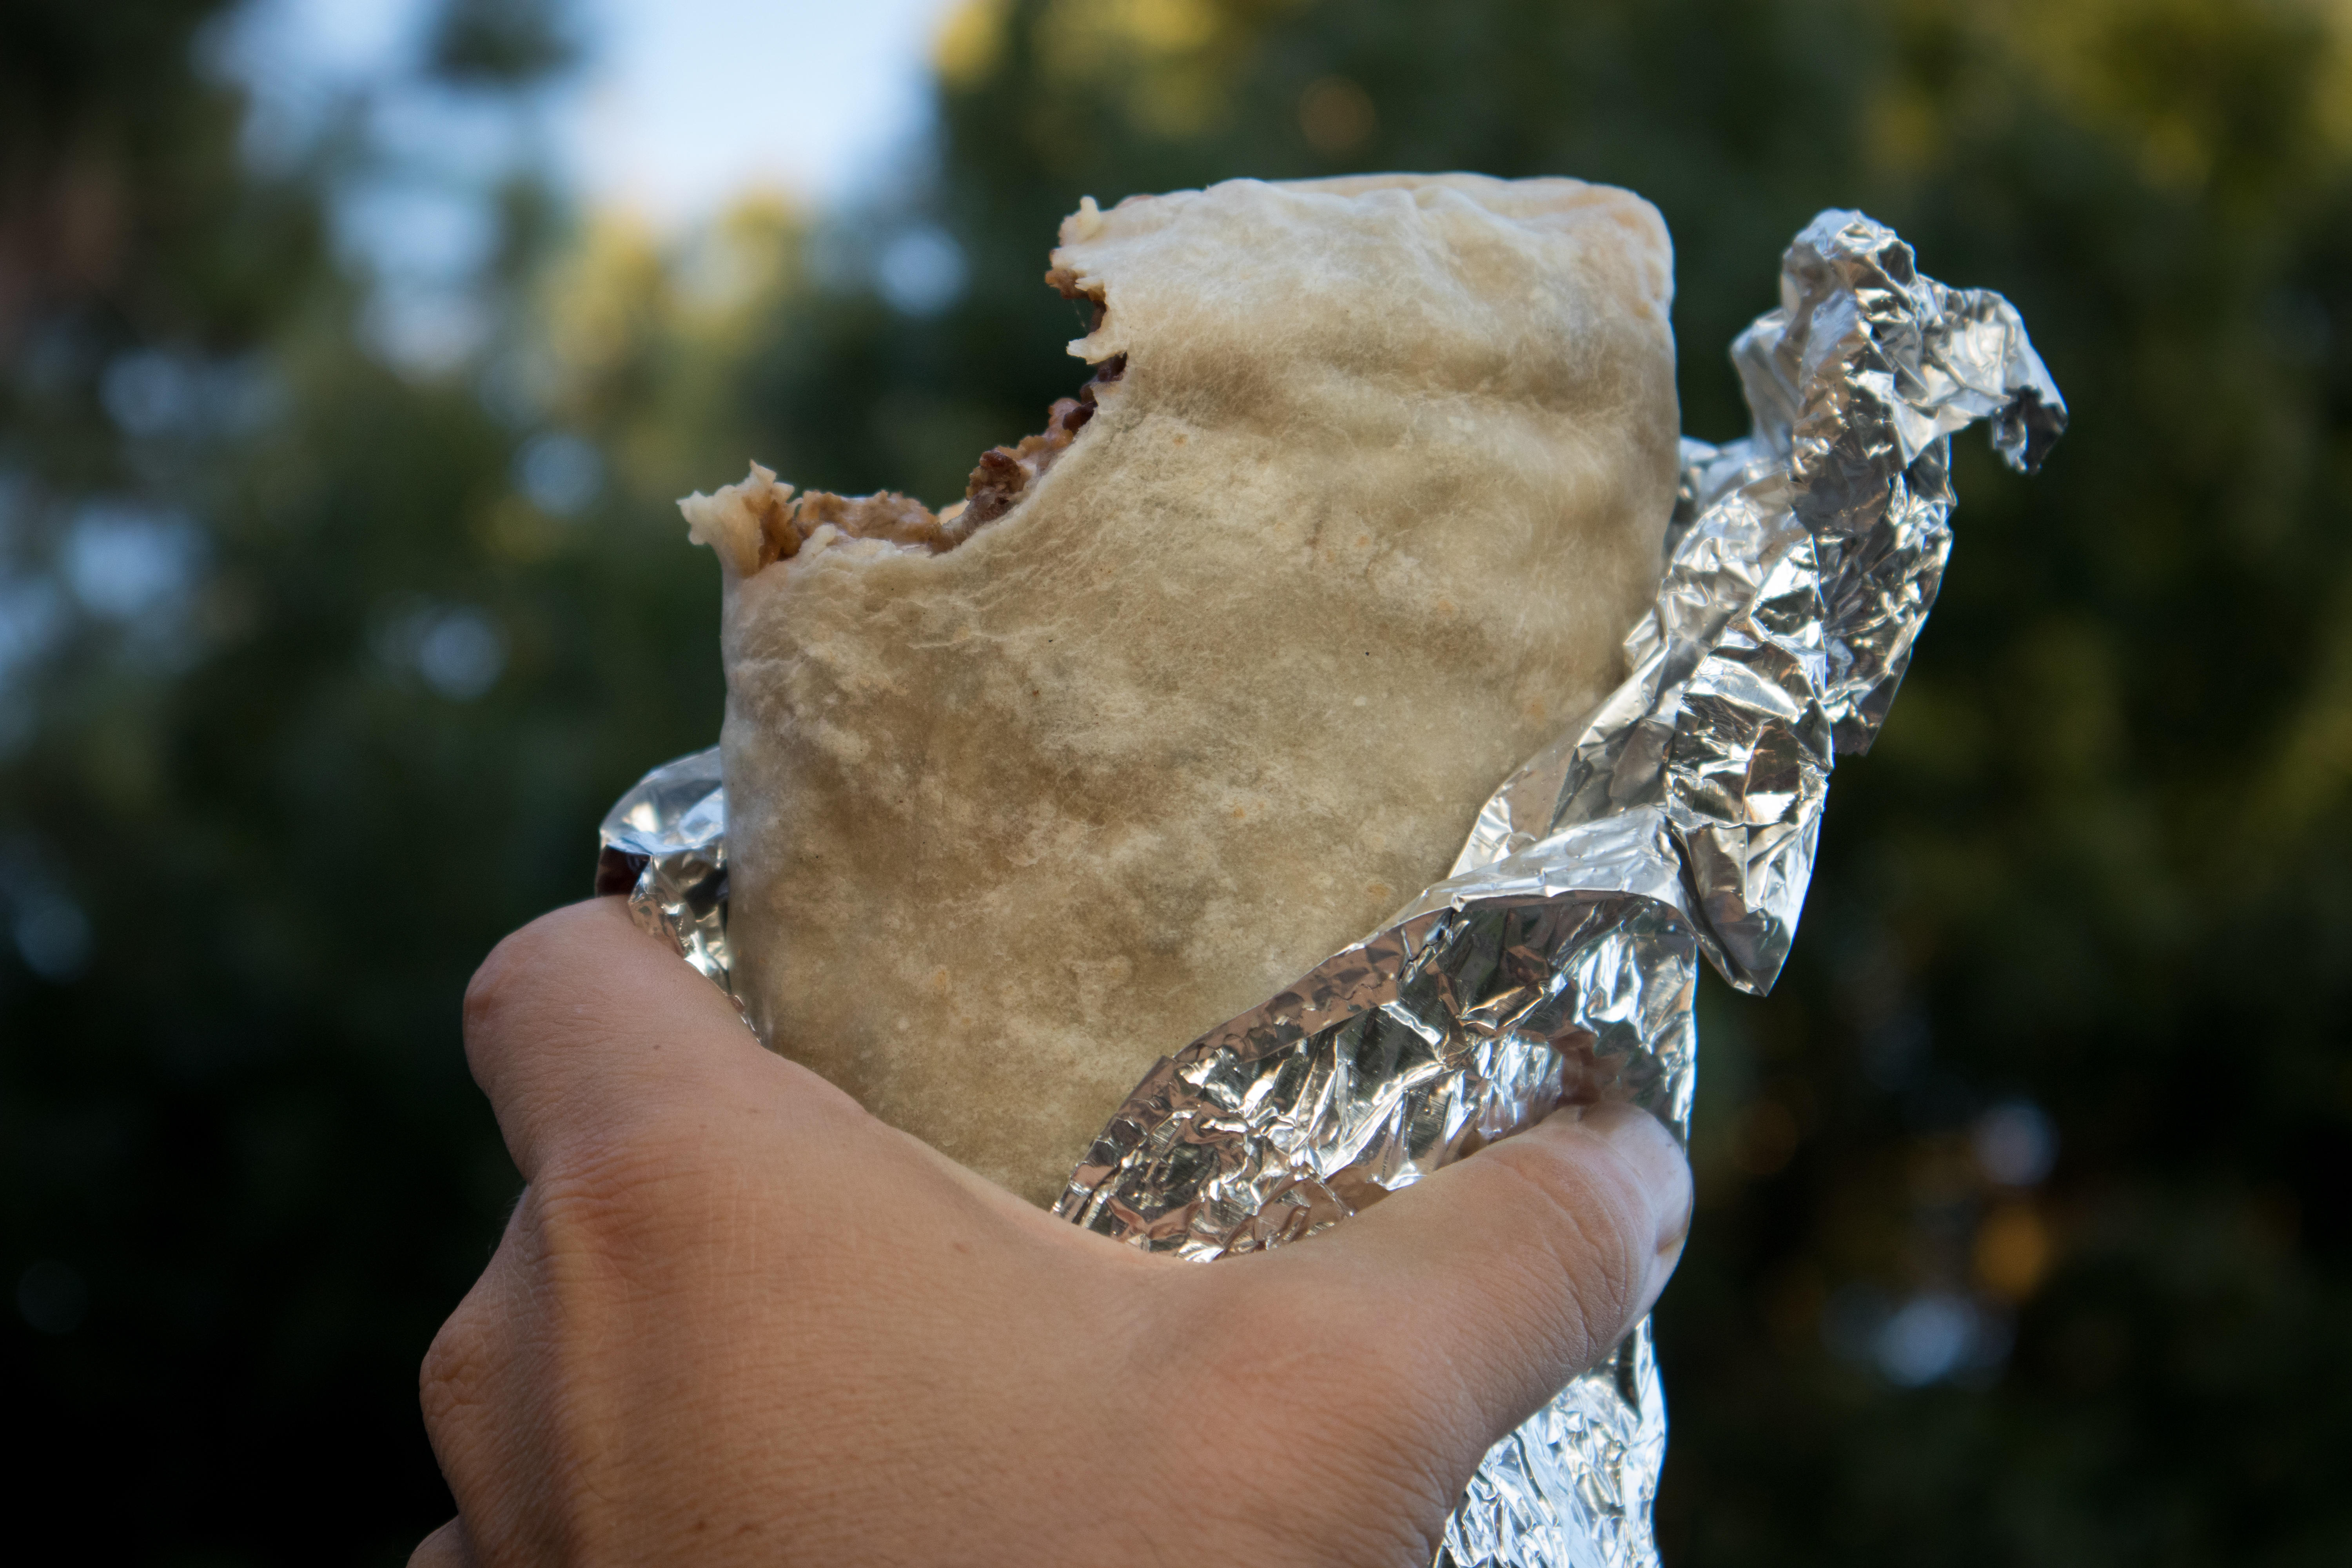 "You need to know where the best burritos in the neighborhood are." Wise advice.